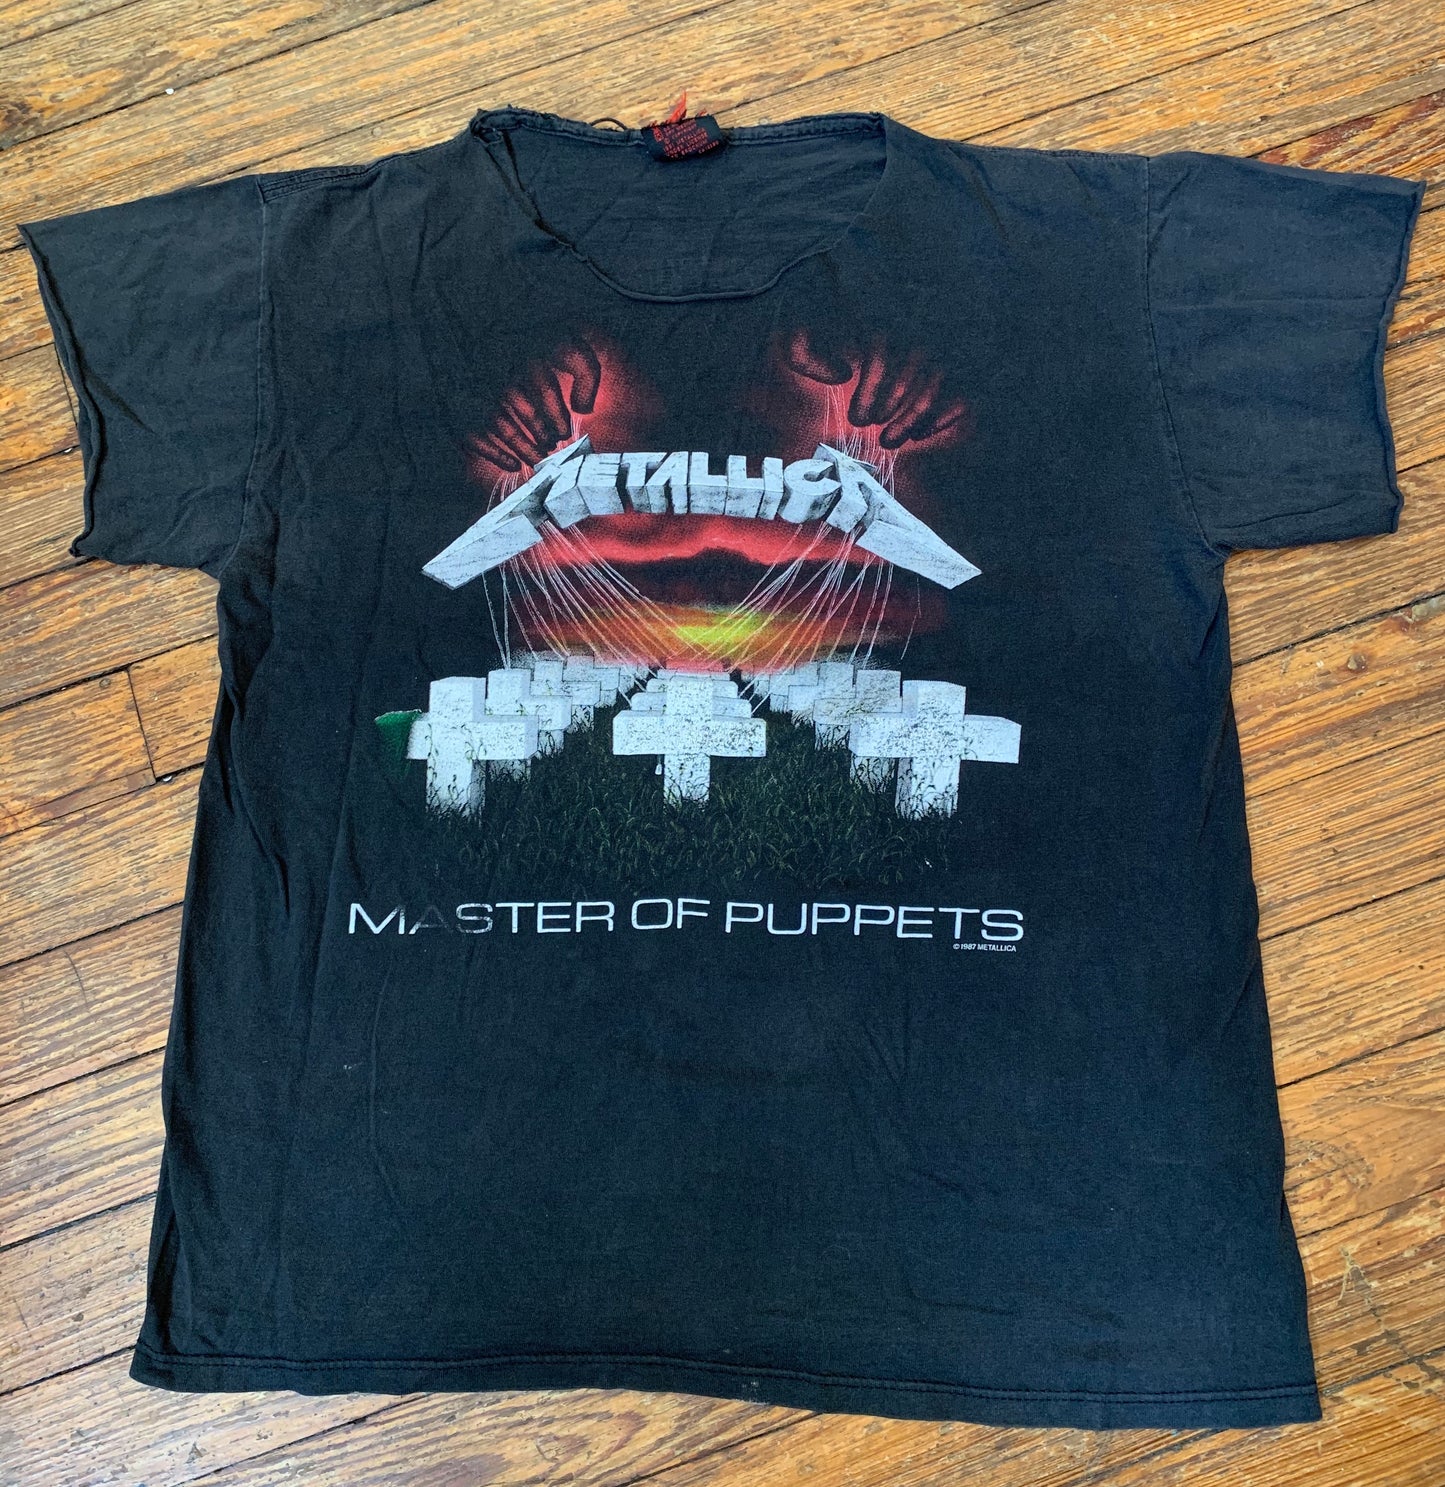 Vintage 1987/1991 Customized Metallica Master of Puppets T-Shirt